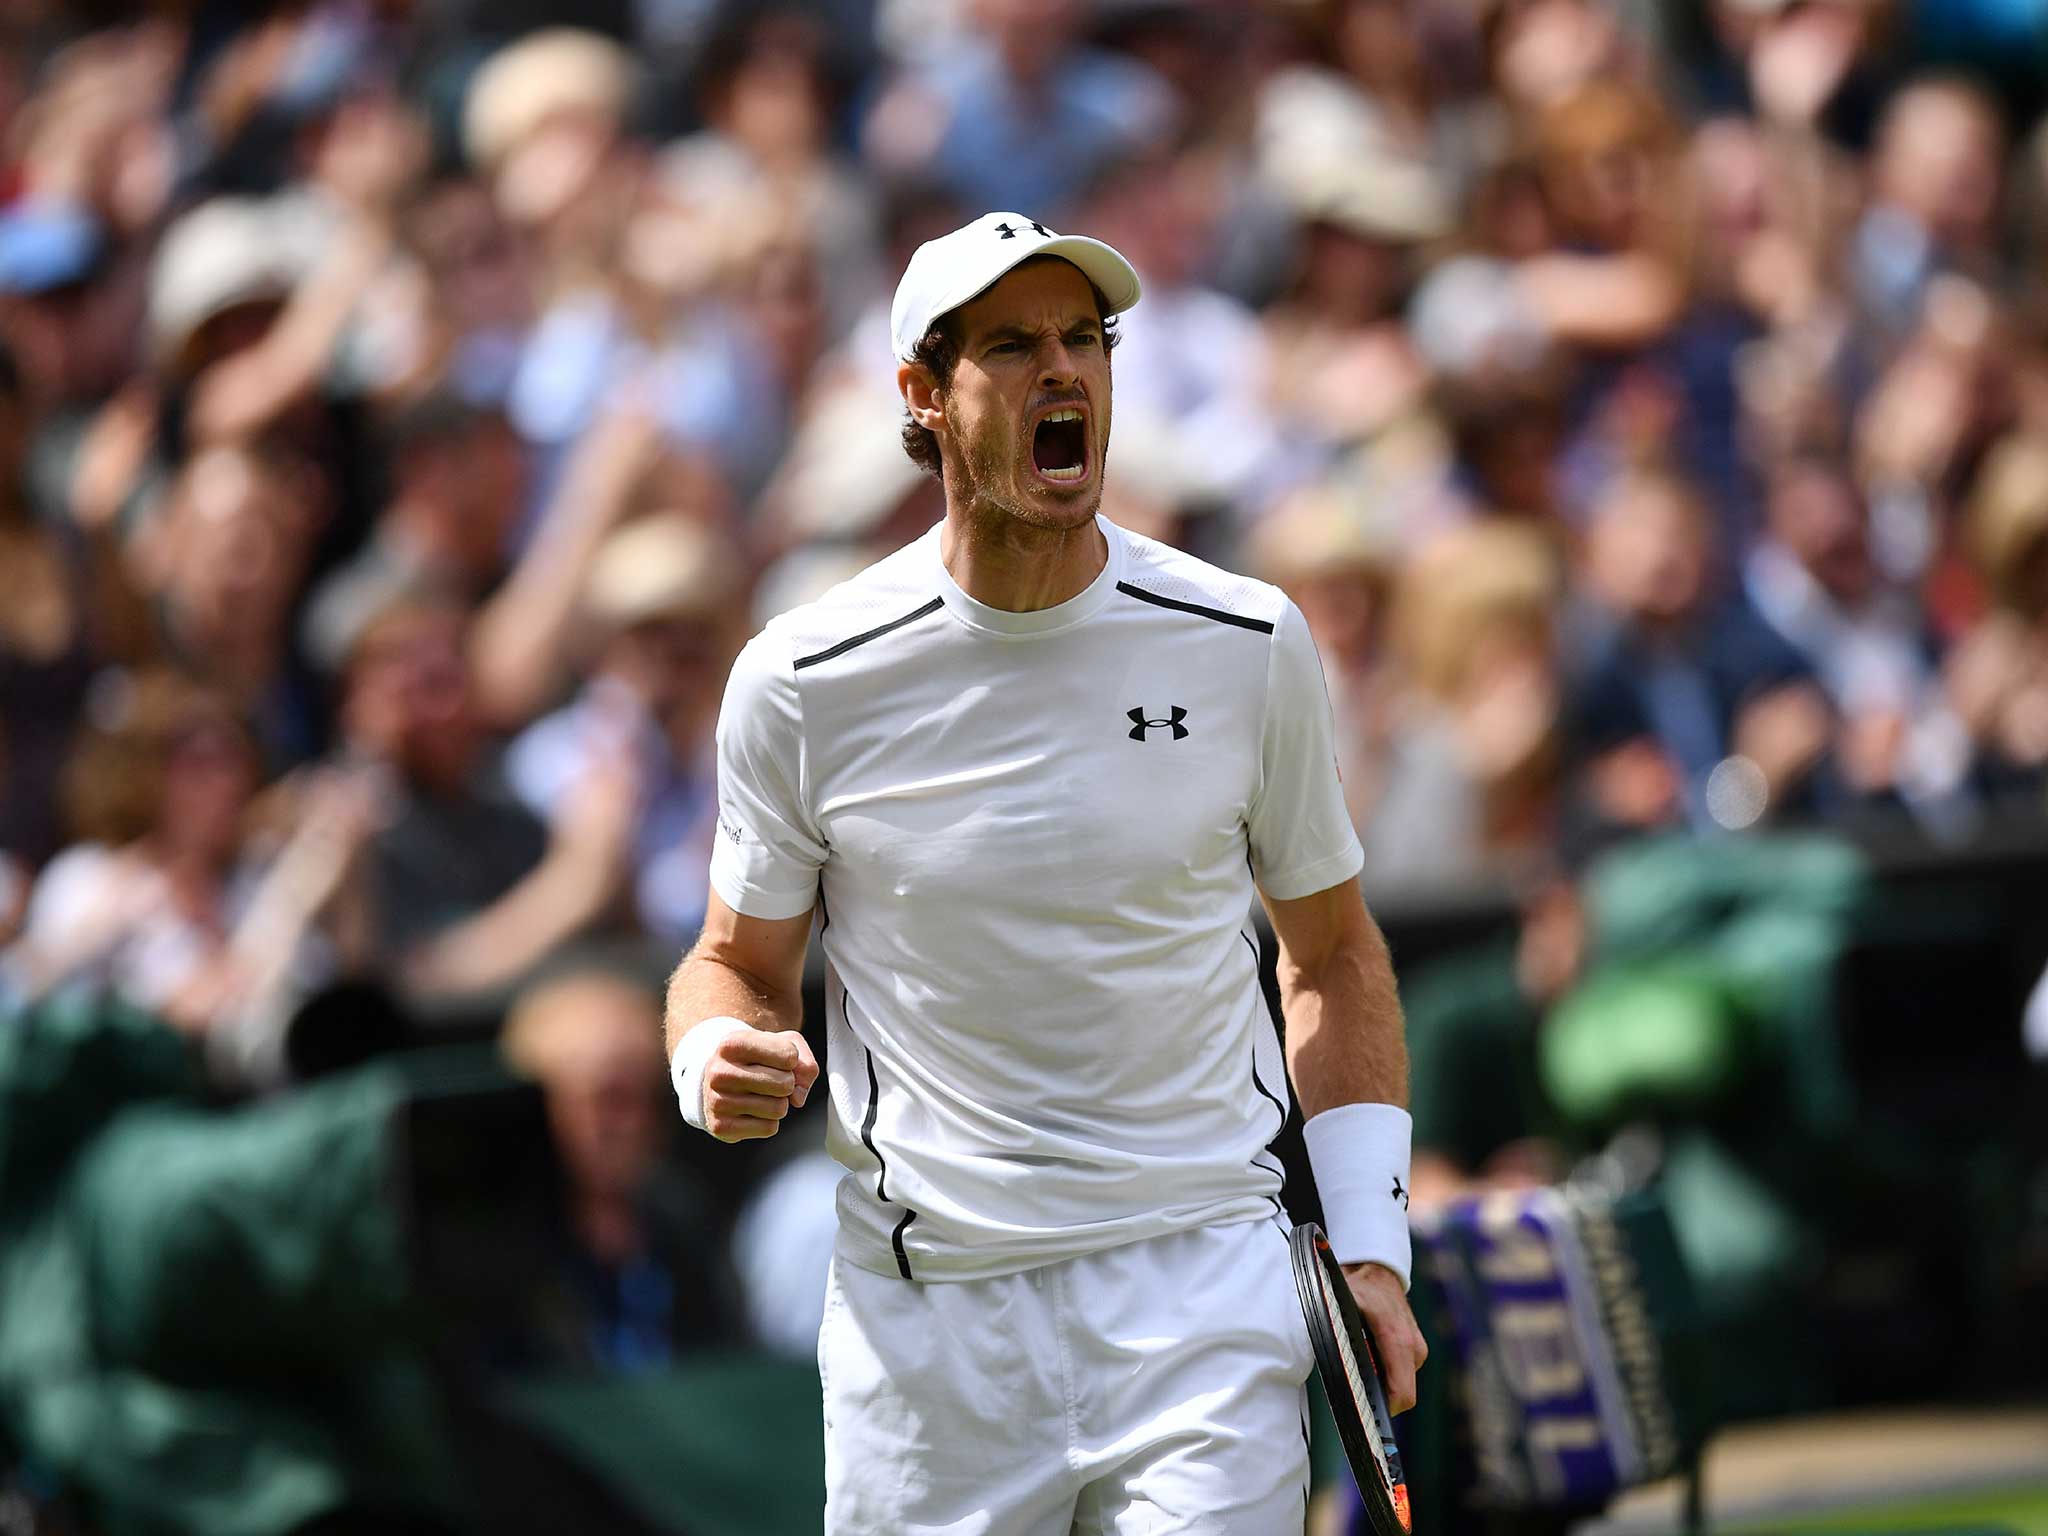 Andy Murray roars in delight upon winning his second Wimbledon title